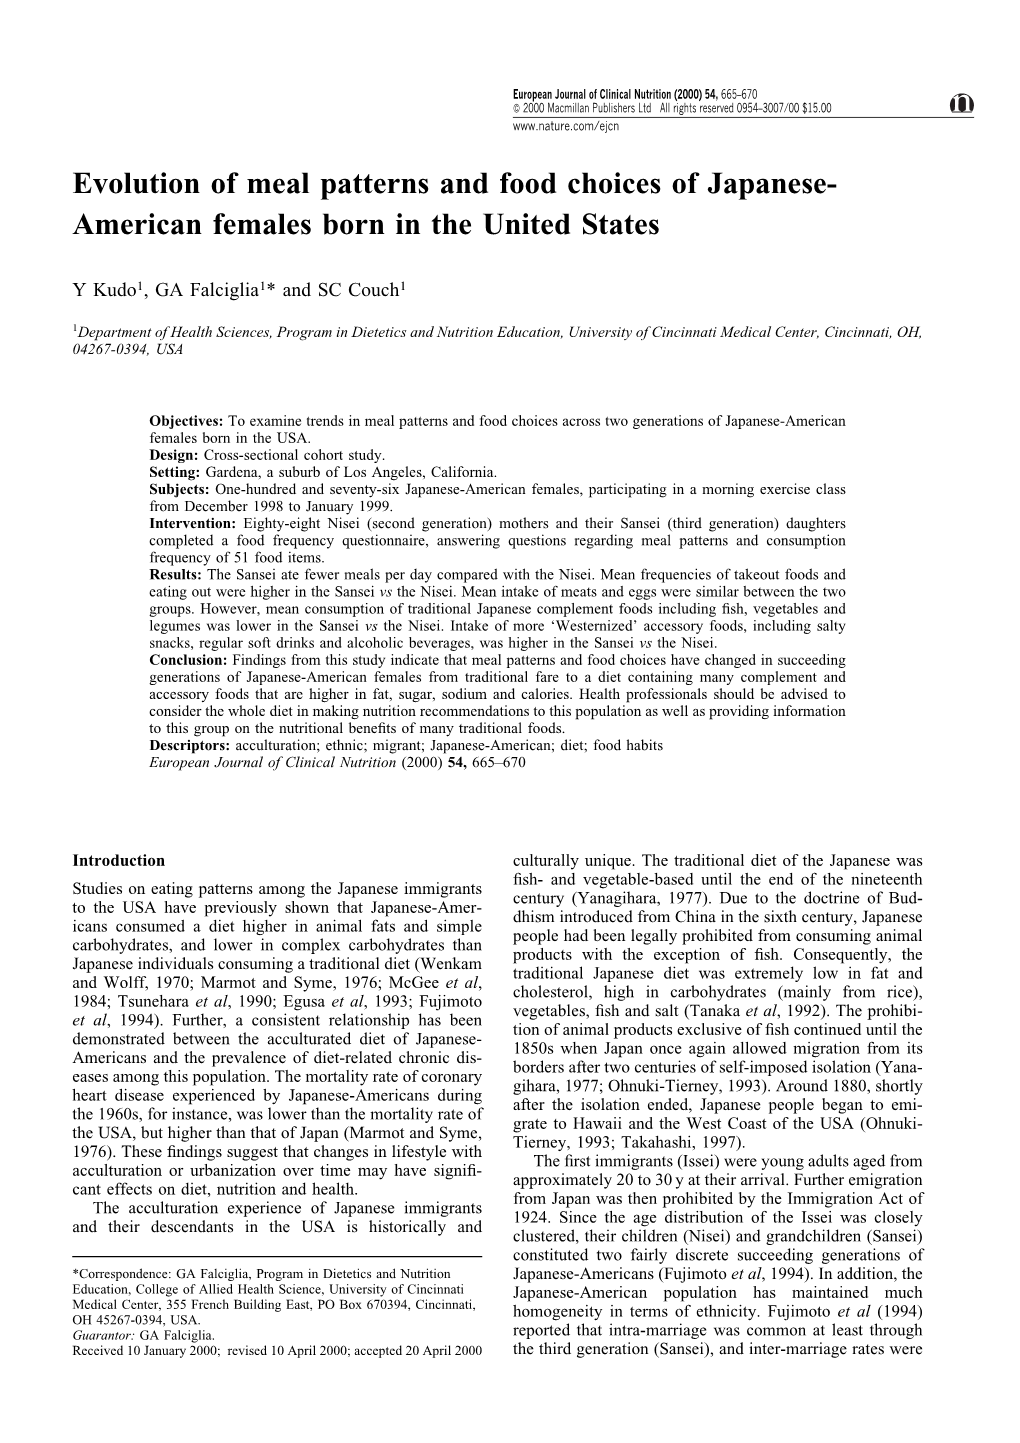 Evolution of Meal Patterns and Food Choices of Japanese- American Females Born in the United States